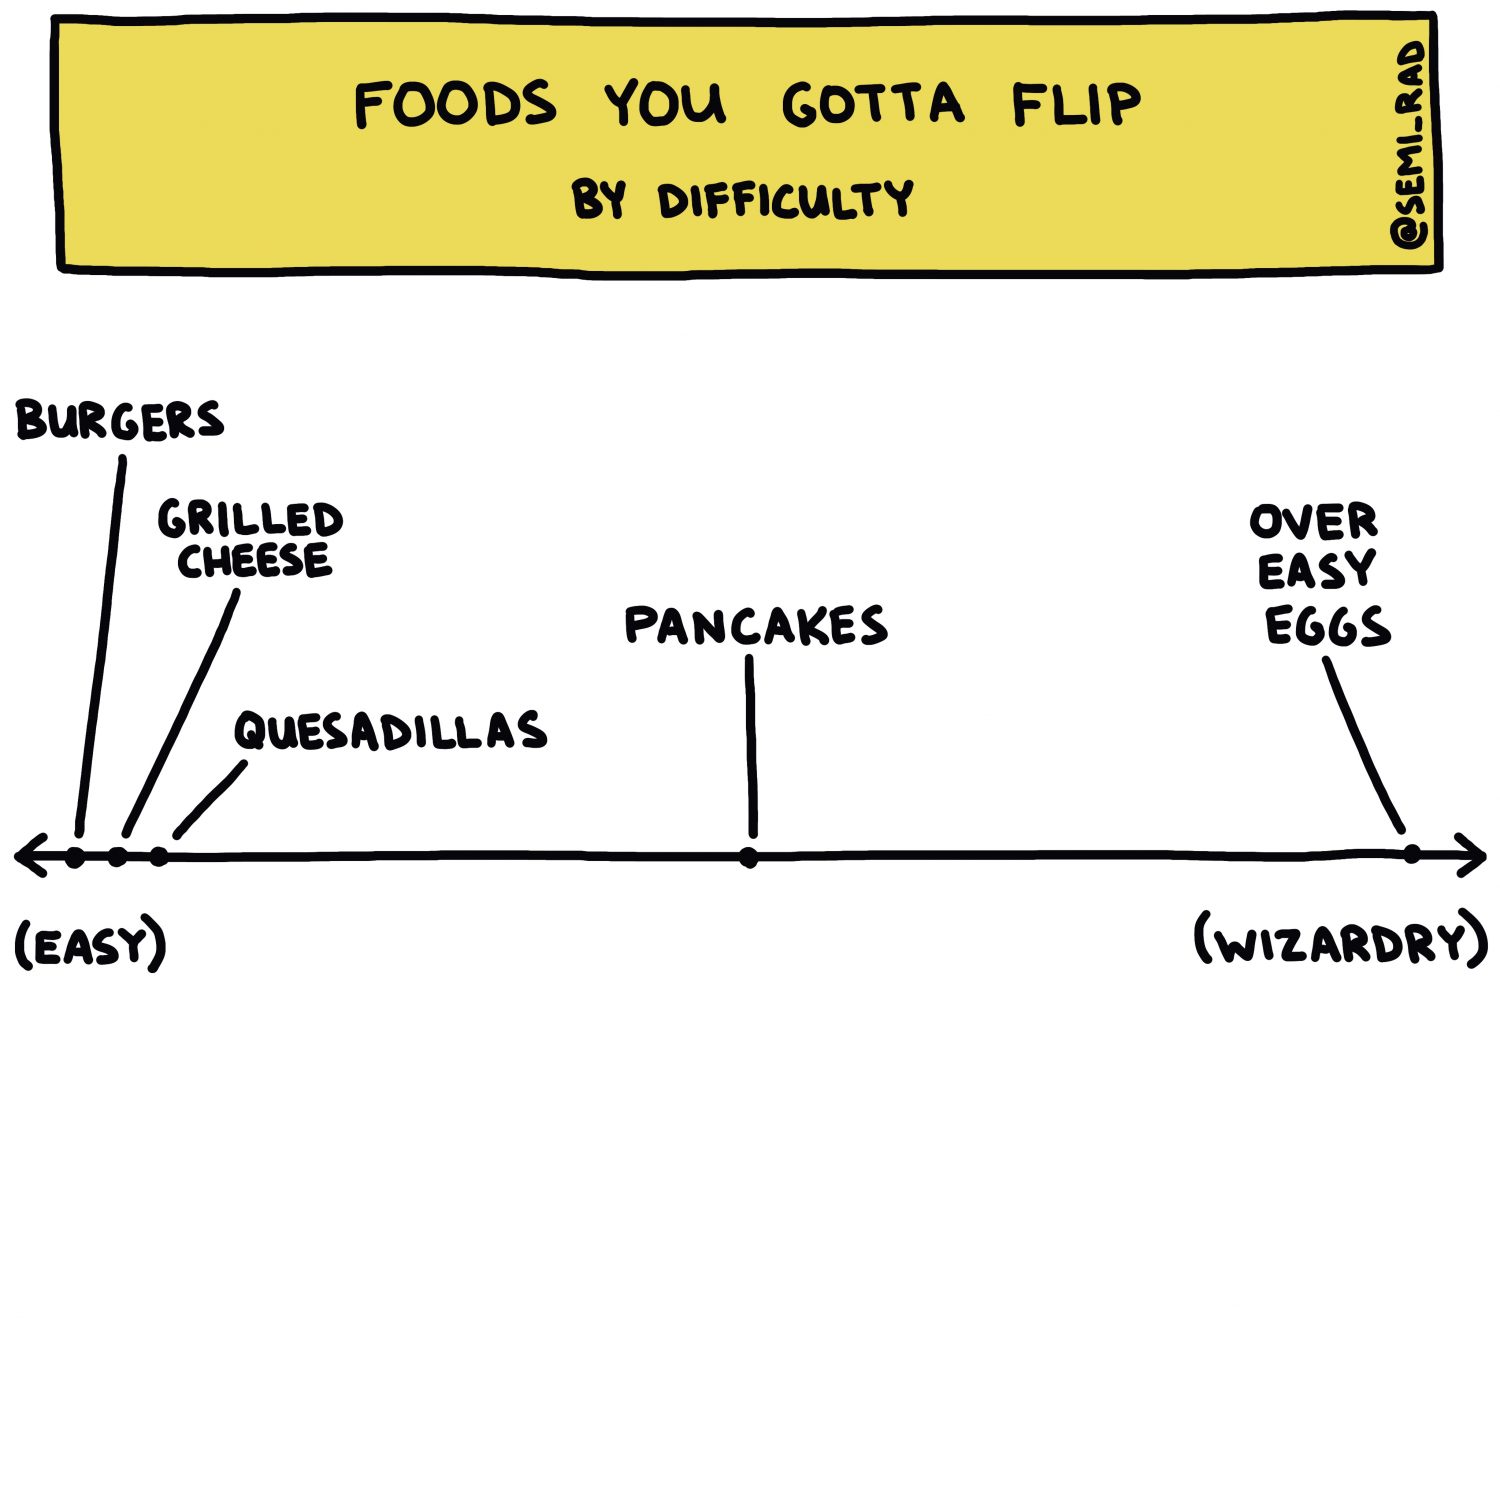 Foods You Gotta Flip, By Difficulty